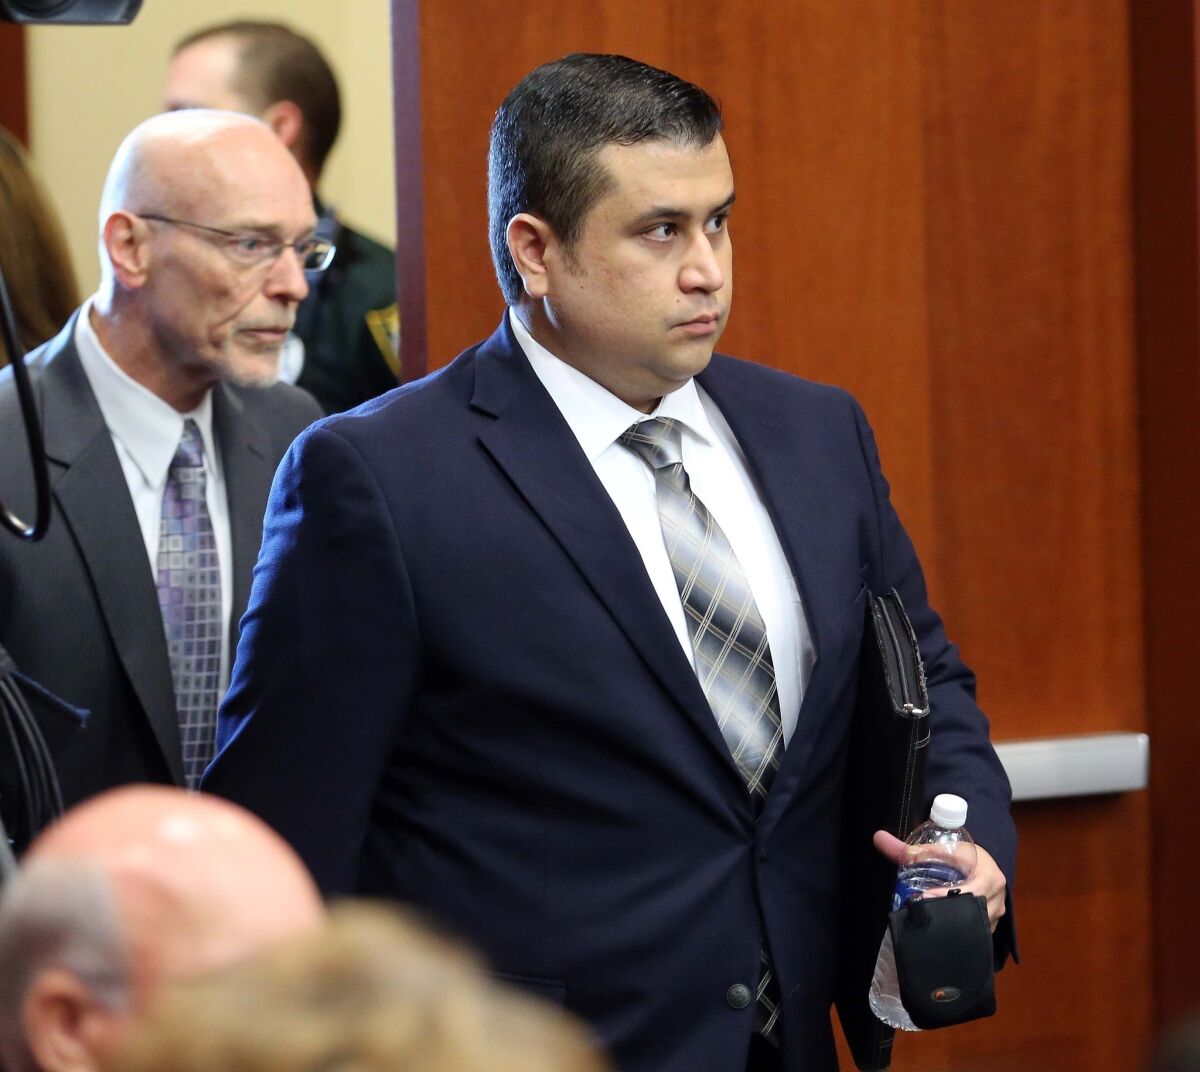 George Zimmerman arrives in circuit court for his trial, along with co-counsel Don West, in Sanford, Fla. Zimmerman is charged in the fatal shooting of unarmed teenager Trayvon Martin.